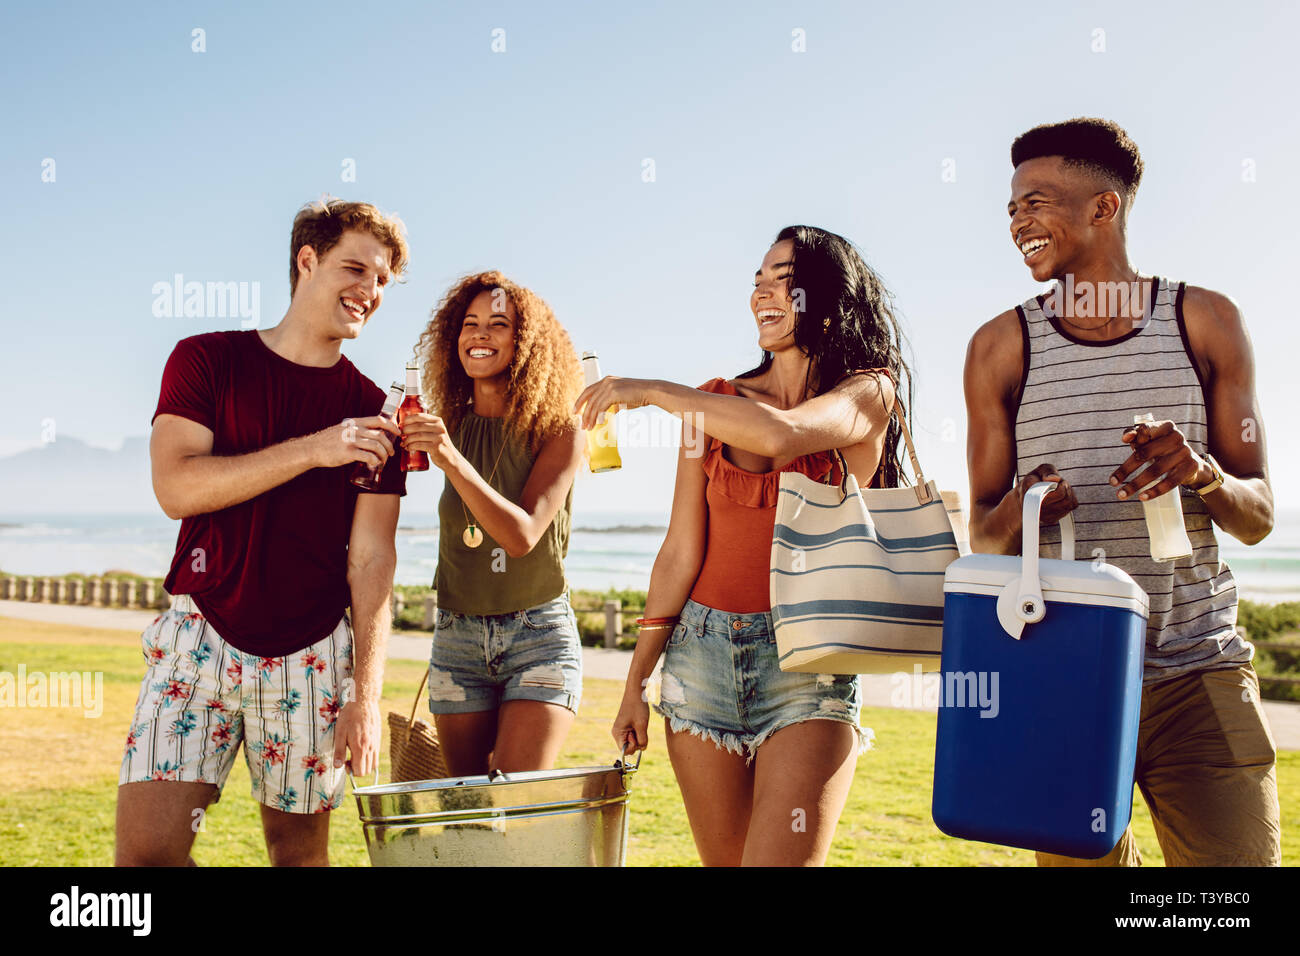 Group of people carrying cooler and beverage tub for party on beach. Diverse group of young people walking outdoors and having drinks. Stock Photo